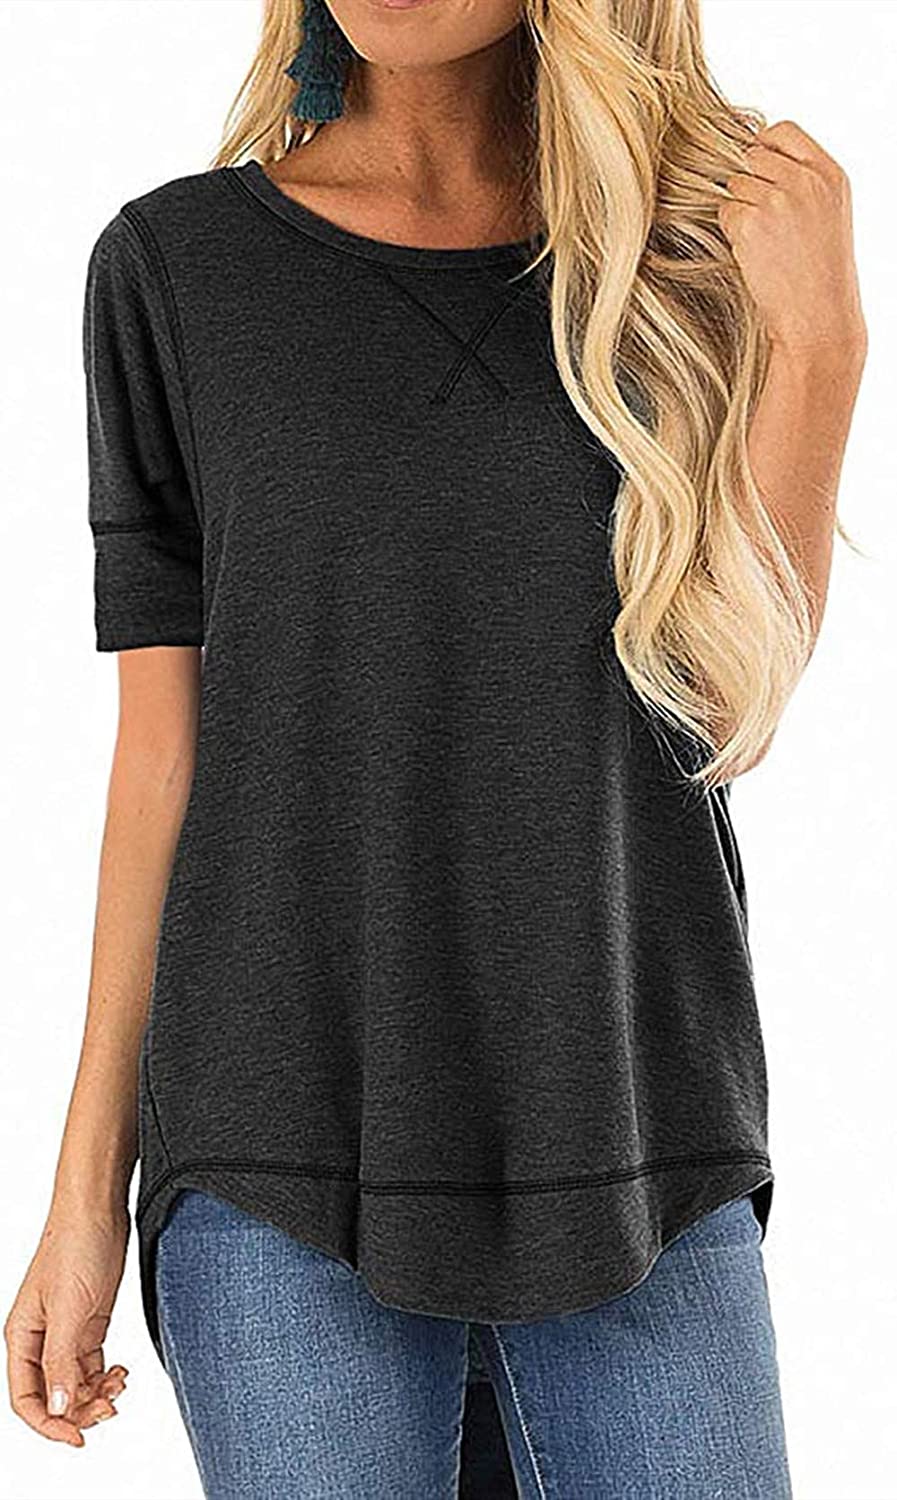 Womens Short Sleeve Loose Fitting T Shirts Cotton Casual Tops